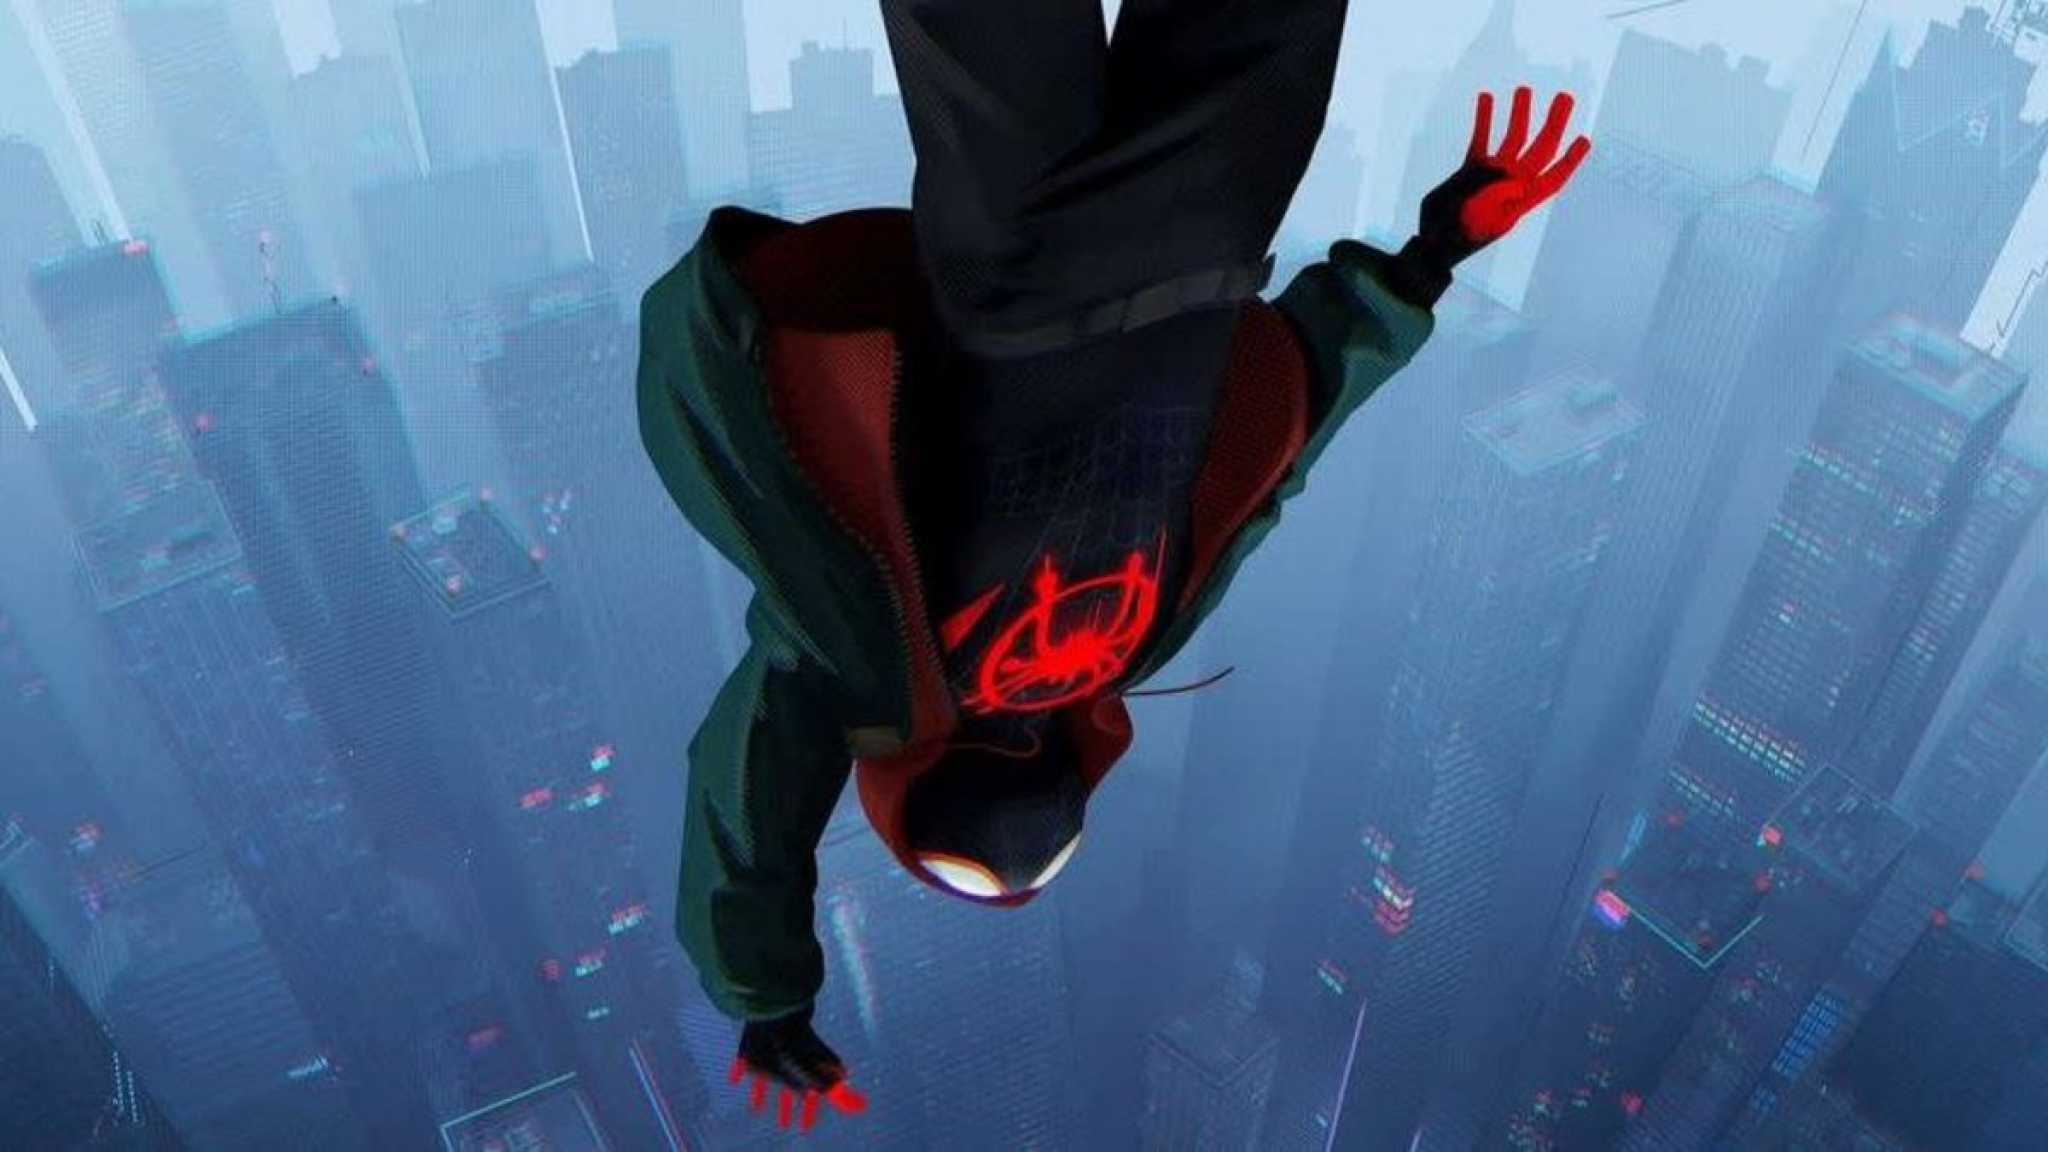 The Spider-Man: Into the Spider-Verse Sequel Has a Trio of New Directors